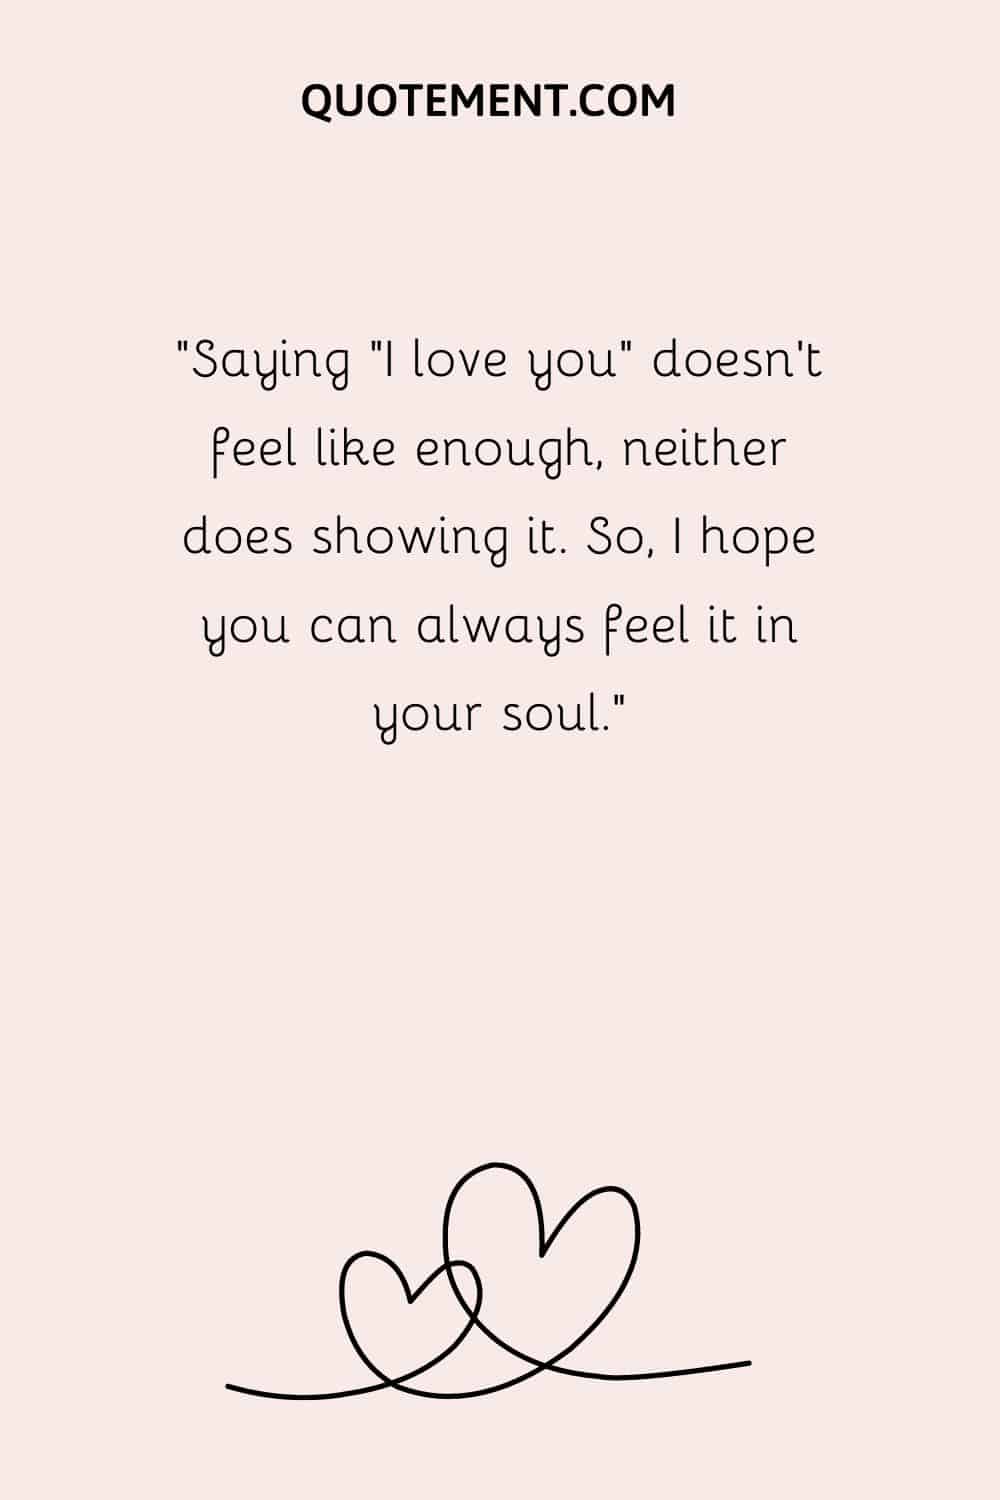 “Saying I love you doesn't feel like enough, neither does showing it. So, I hope you can always feel it in your soul.”